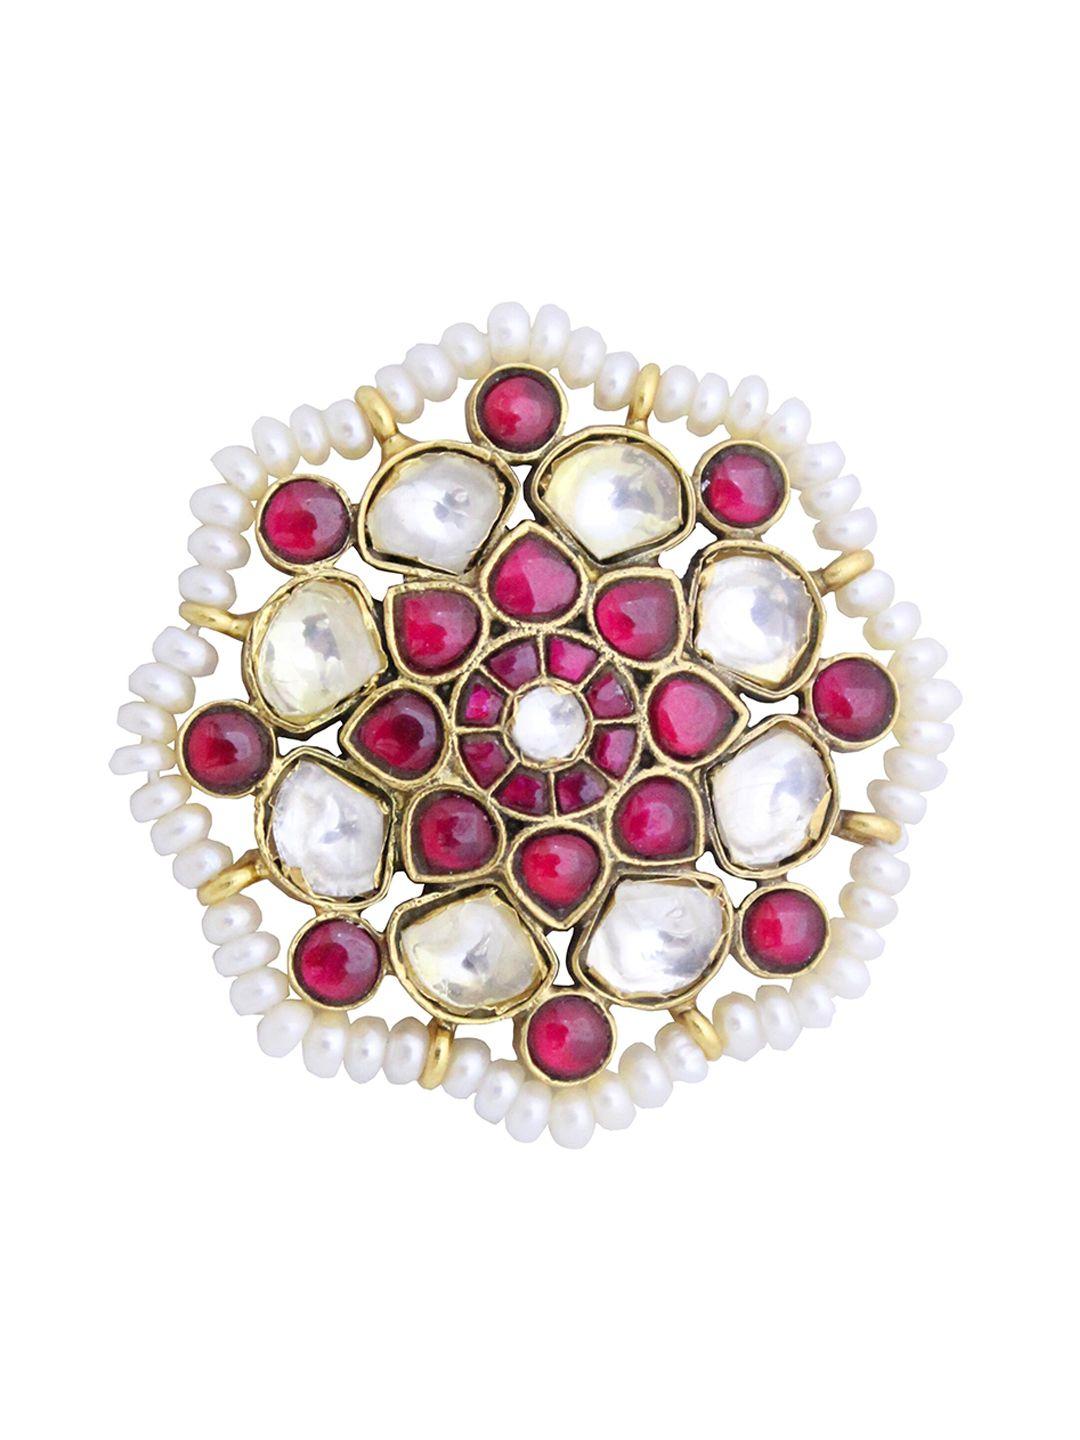 ahilya 92.5 sterling silver gold-plated stone-studded beaded adjustable finger ring